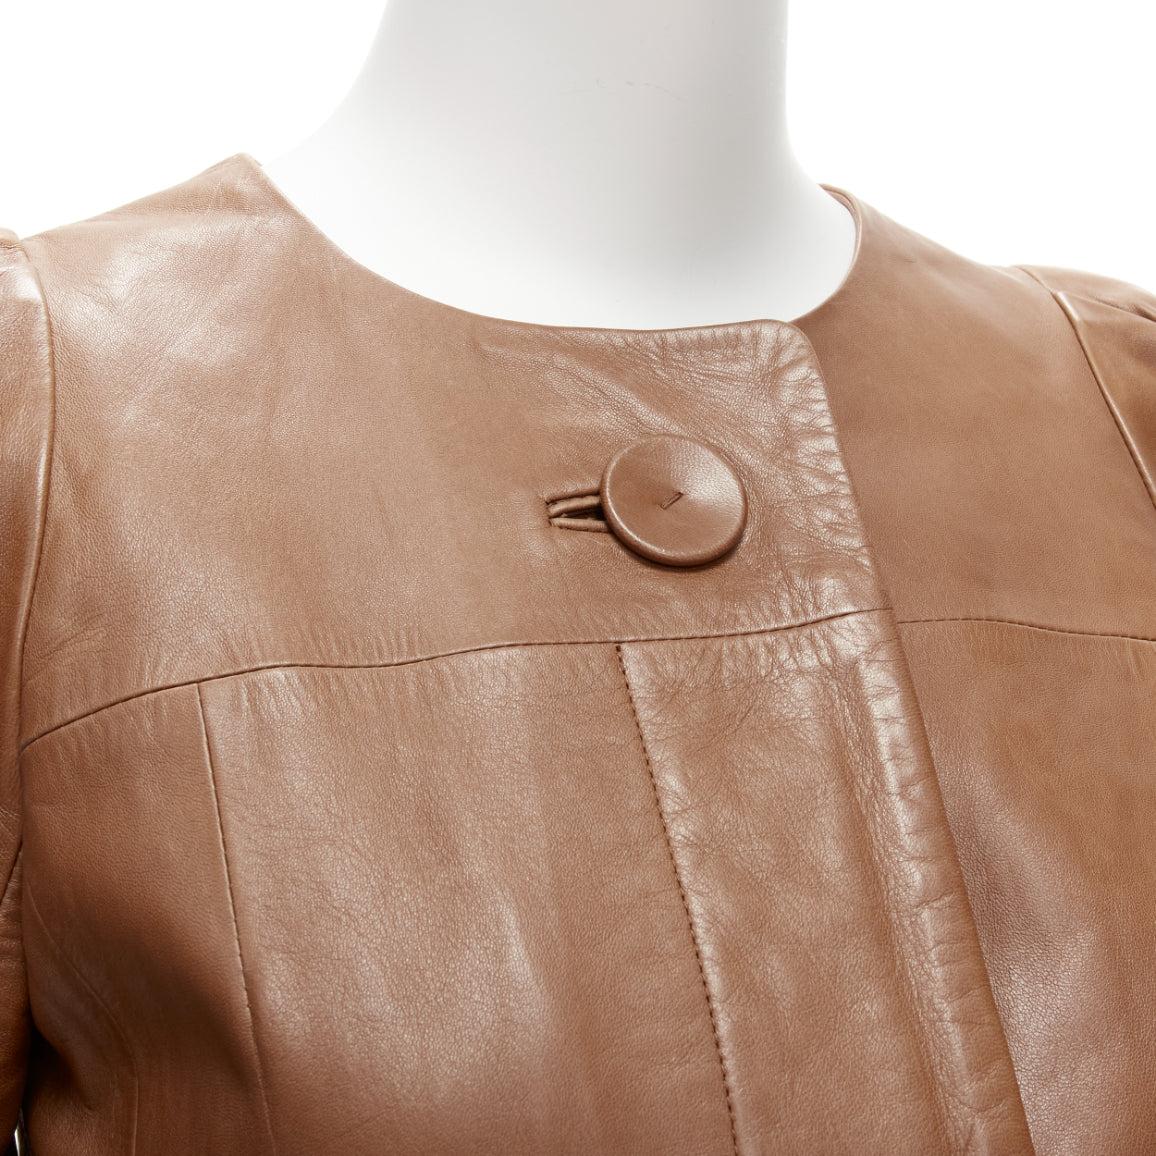 CHLOE tan brown lambskin leather big button cropped jacket FR36 S
Reference: SNKO/A00254
Brand: Chloe
Material: Leather
Color: Brown
Pattern: Solid
Closure: Button
Lining: Grey Fabric
Extra Details: Dart at shoulders. Fully lined.
Made in: